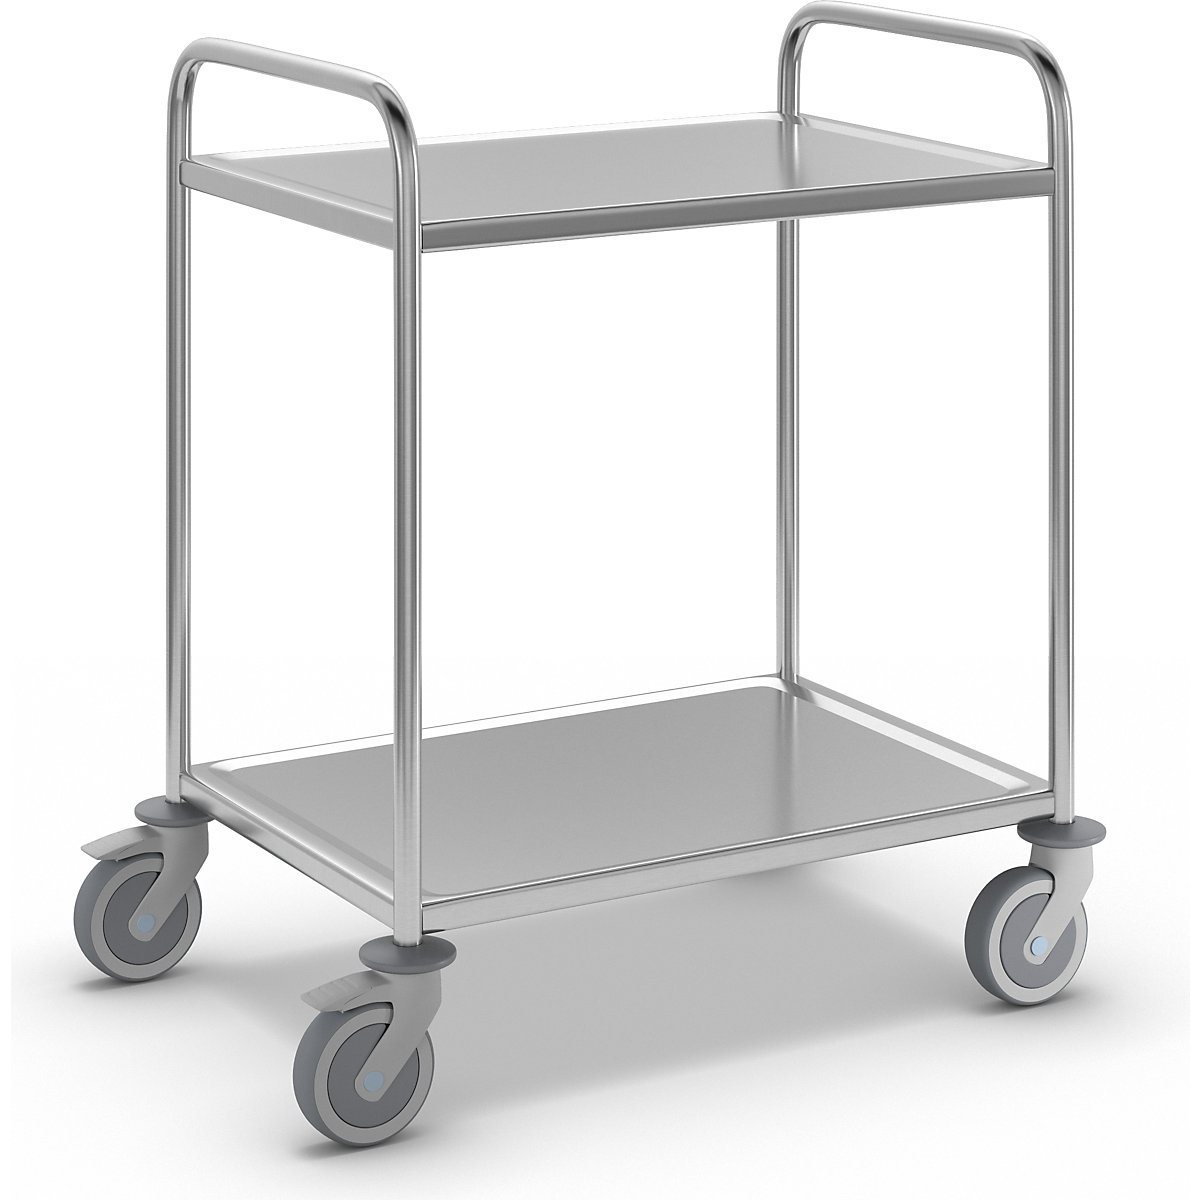 Stainless steel serving trolley – Kongamek, LxWxH 910 x 590 x 965 mm, with 2 shelves-1